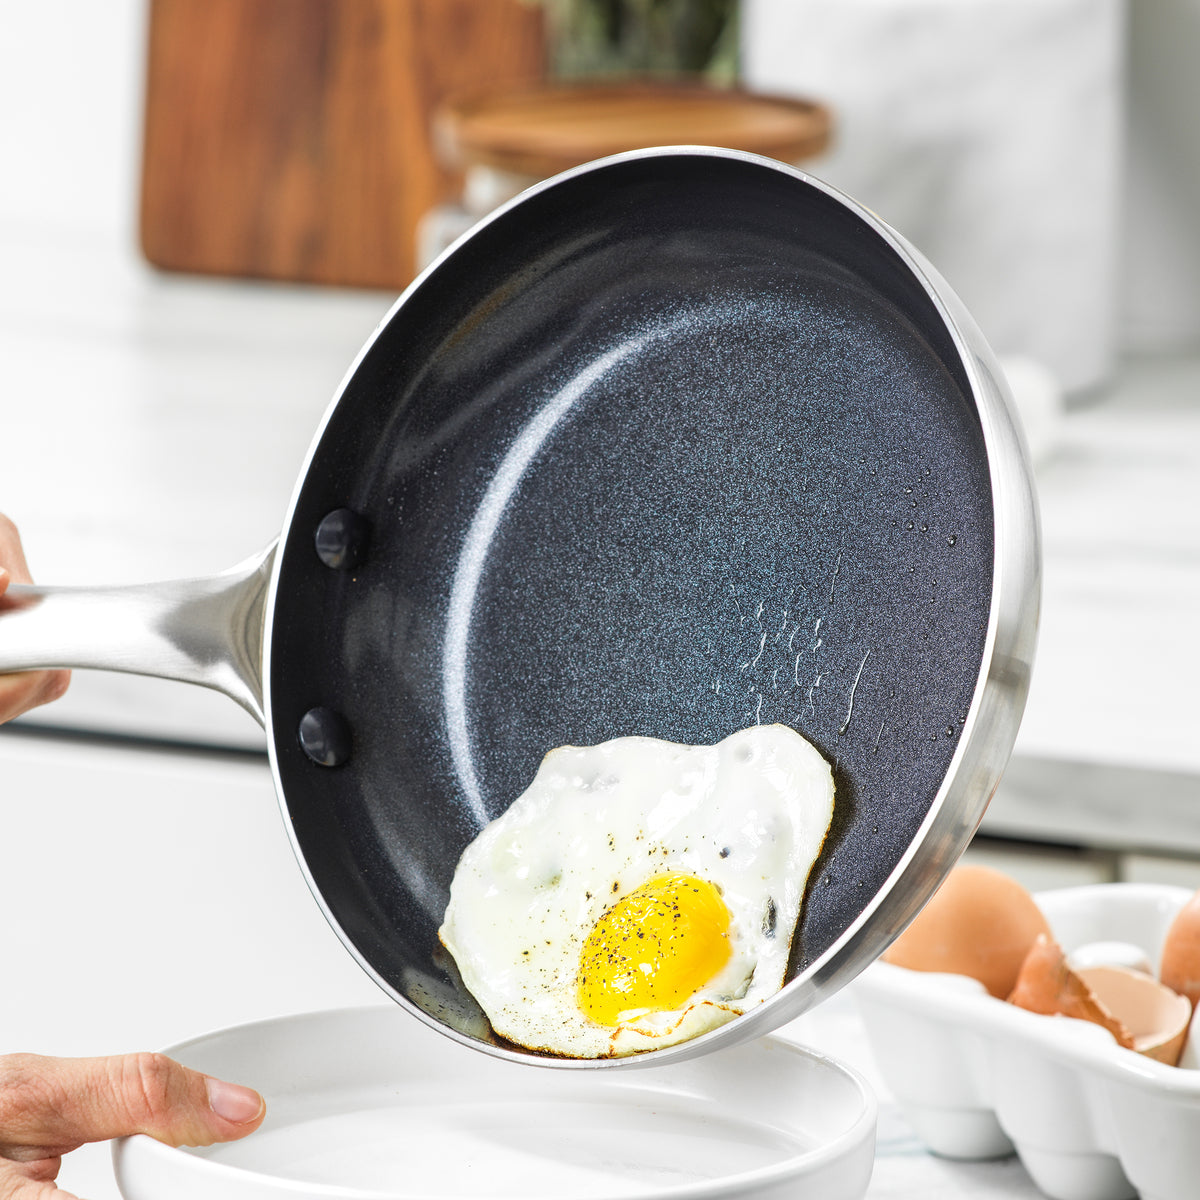 OXO Ceramic Non-Stick Agility Series Frying Pan Set, 9.5” and 11”